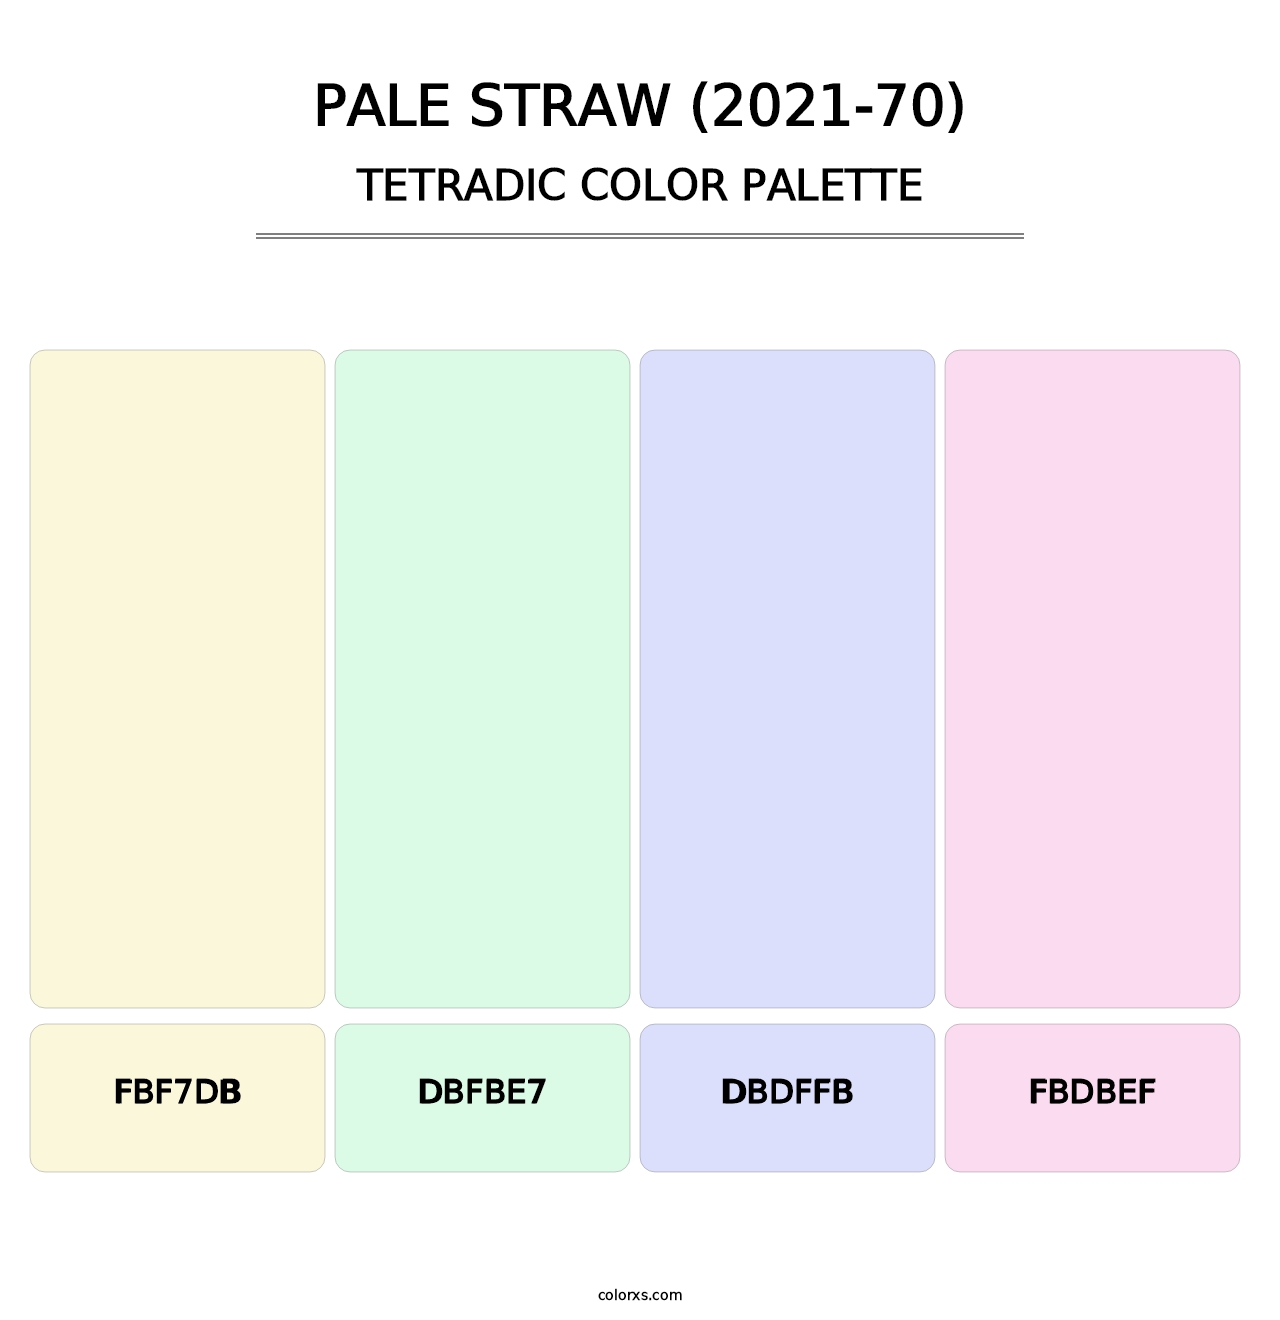 Pale Straw (2021-70) - Tetradic Color Palette